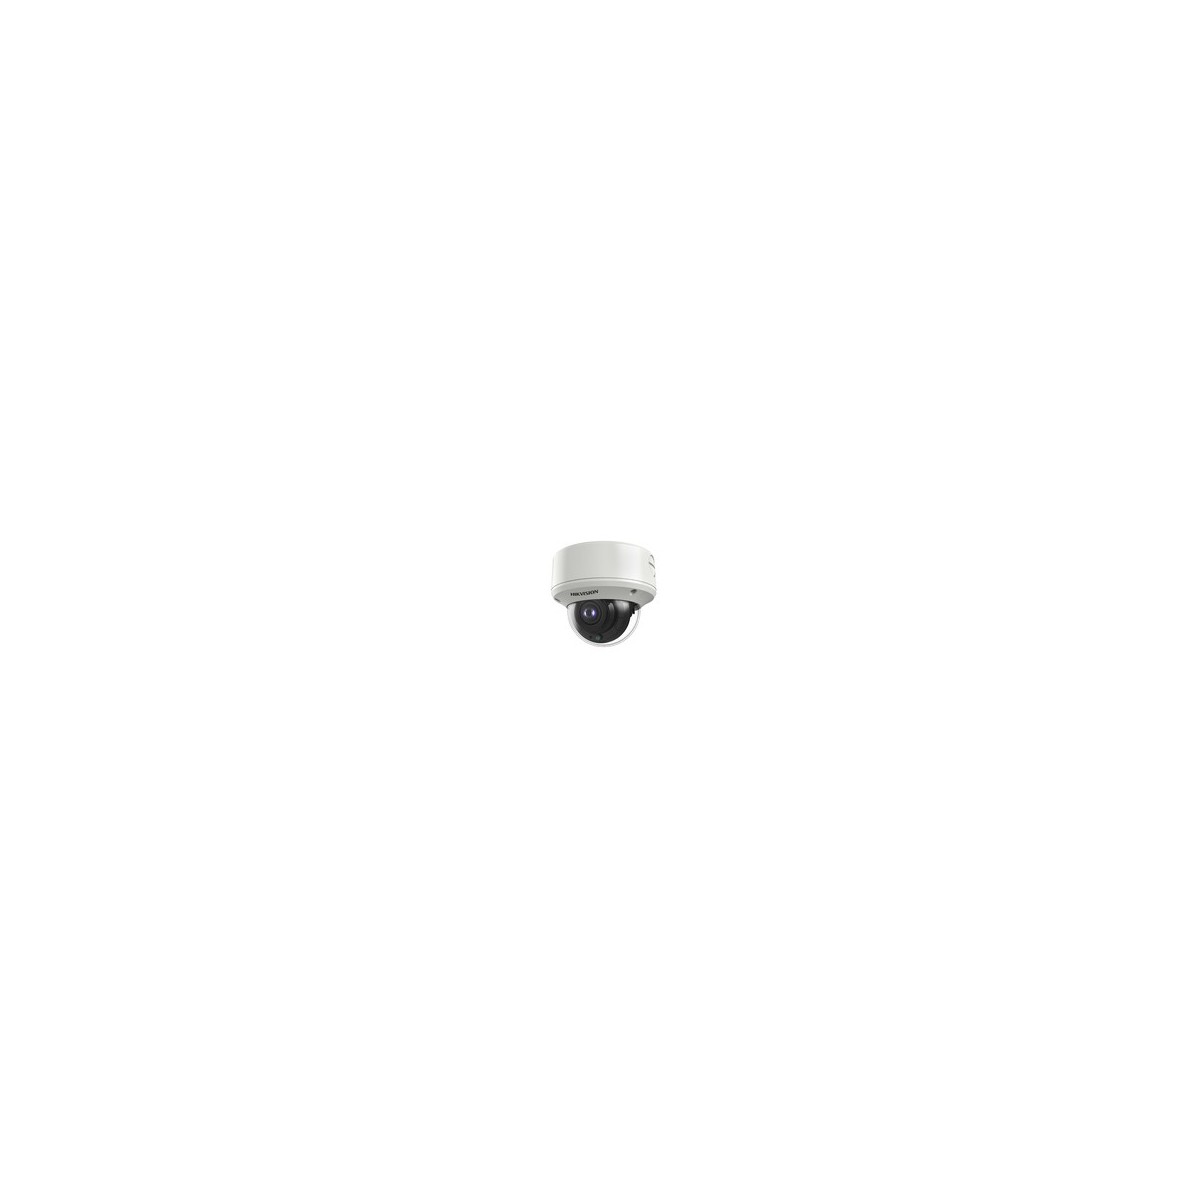 Hikvision Digital Technology DS-2CE59U7T-AVPIT3ZF - CCTV security camera - Outdoor - Wired - Ceiling-wall - Black - White - Dome